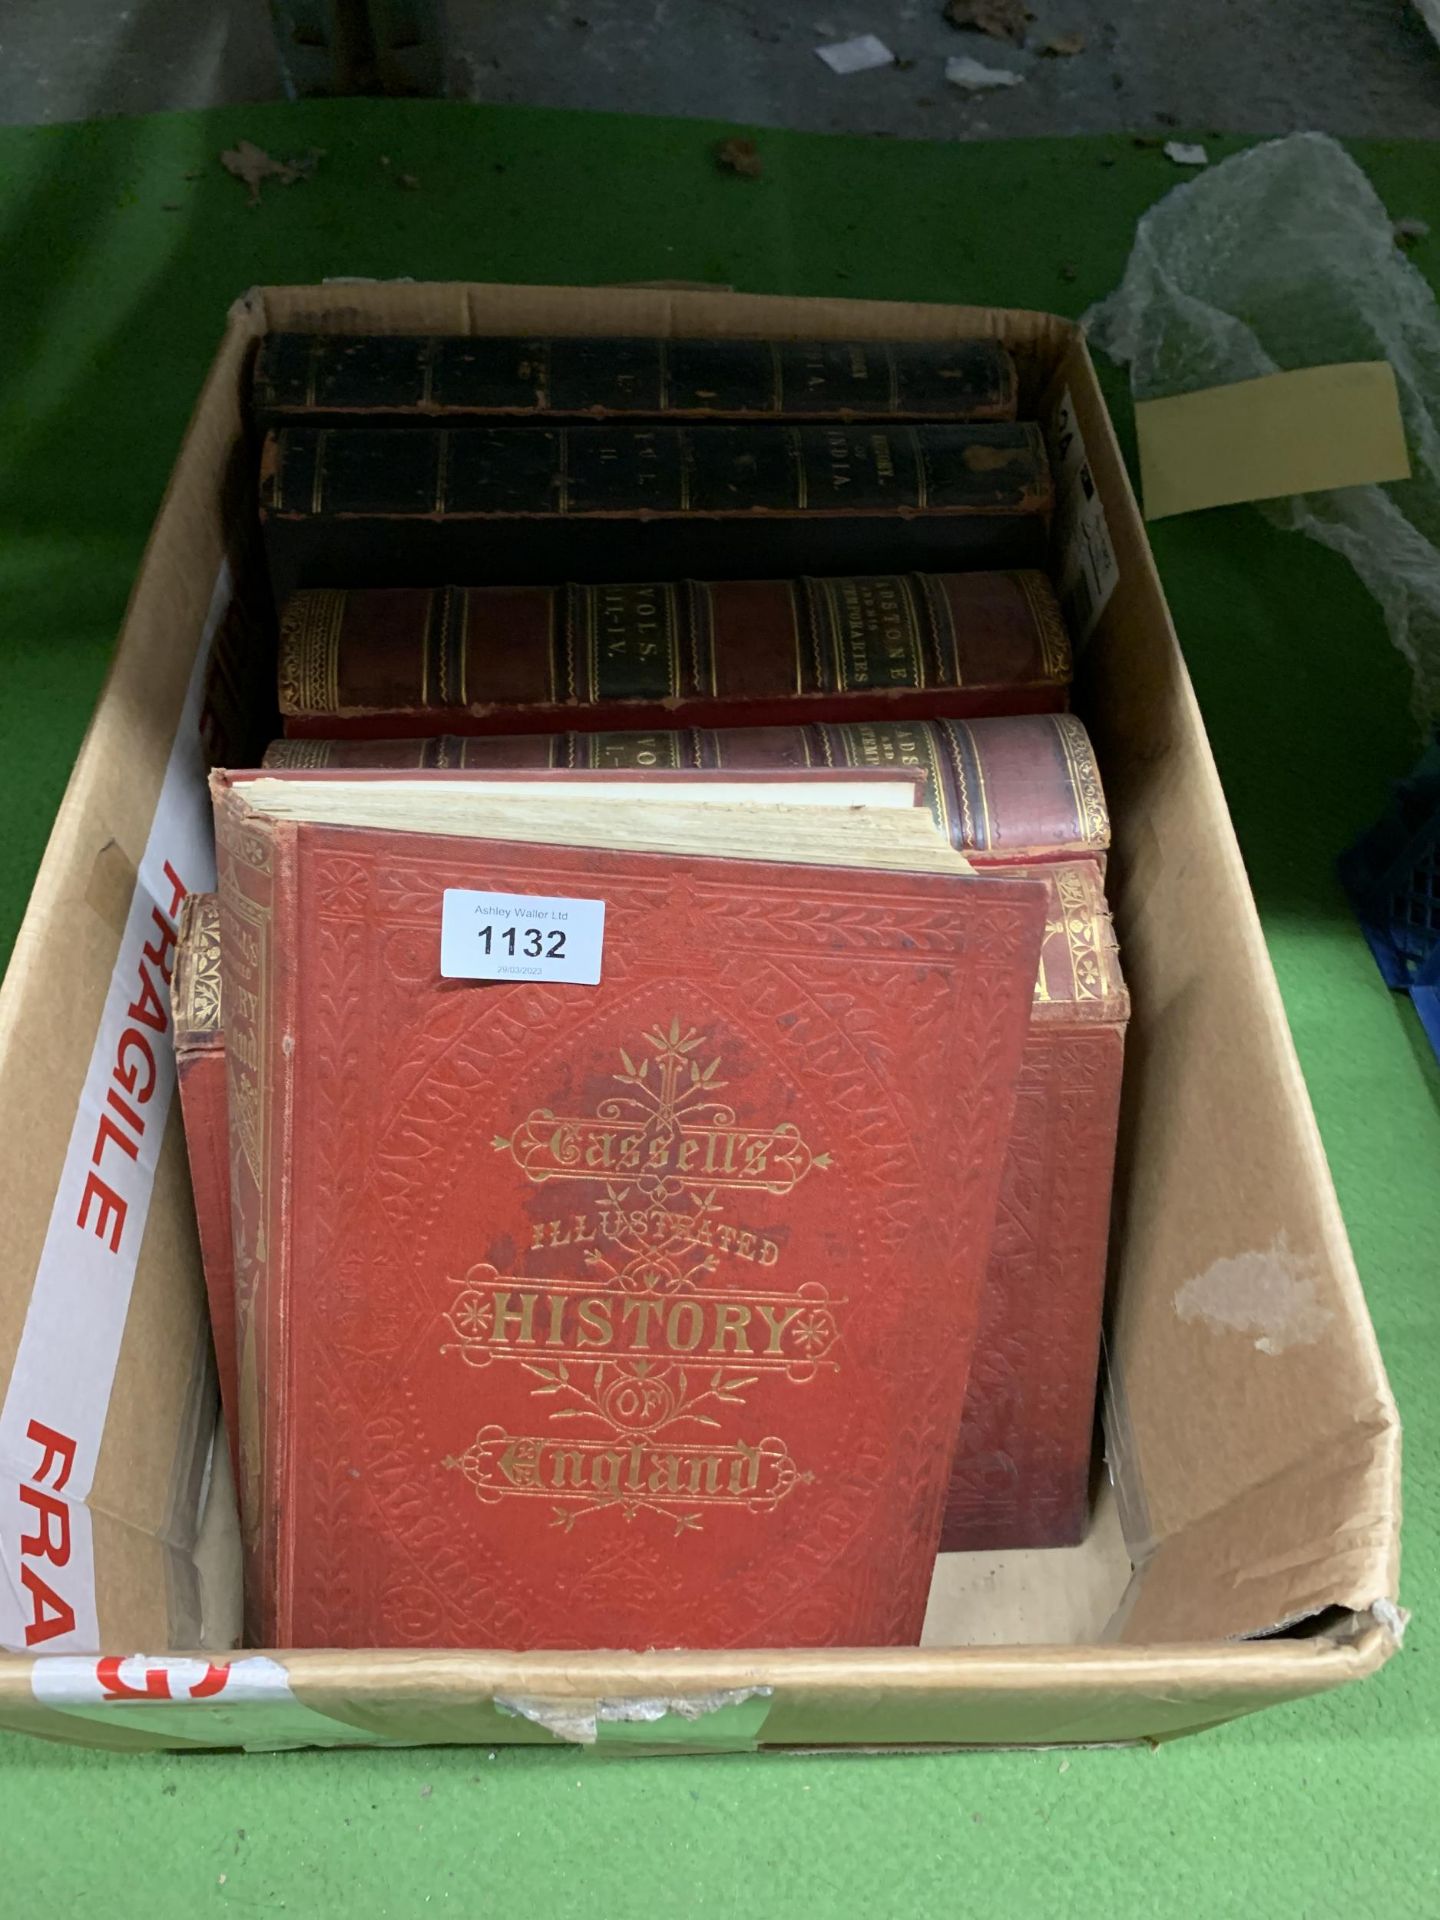 SIX VINTAGE BOOKS TO INCLUDE VOLUME I AND II OF THE HISTORY OF INDIA, VOLUMES I - IV 'GLADSTONE